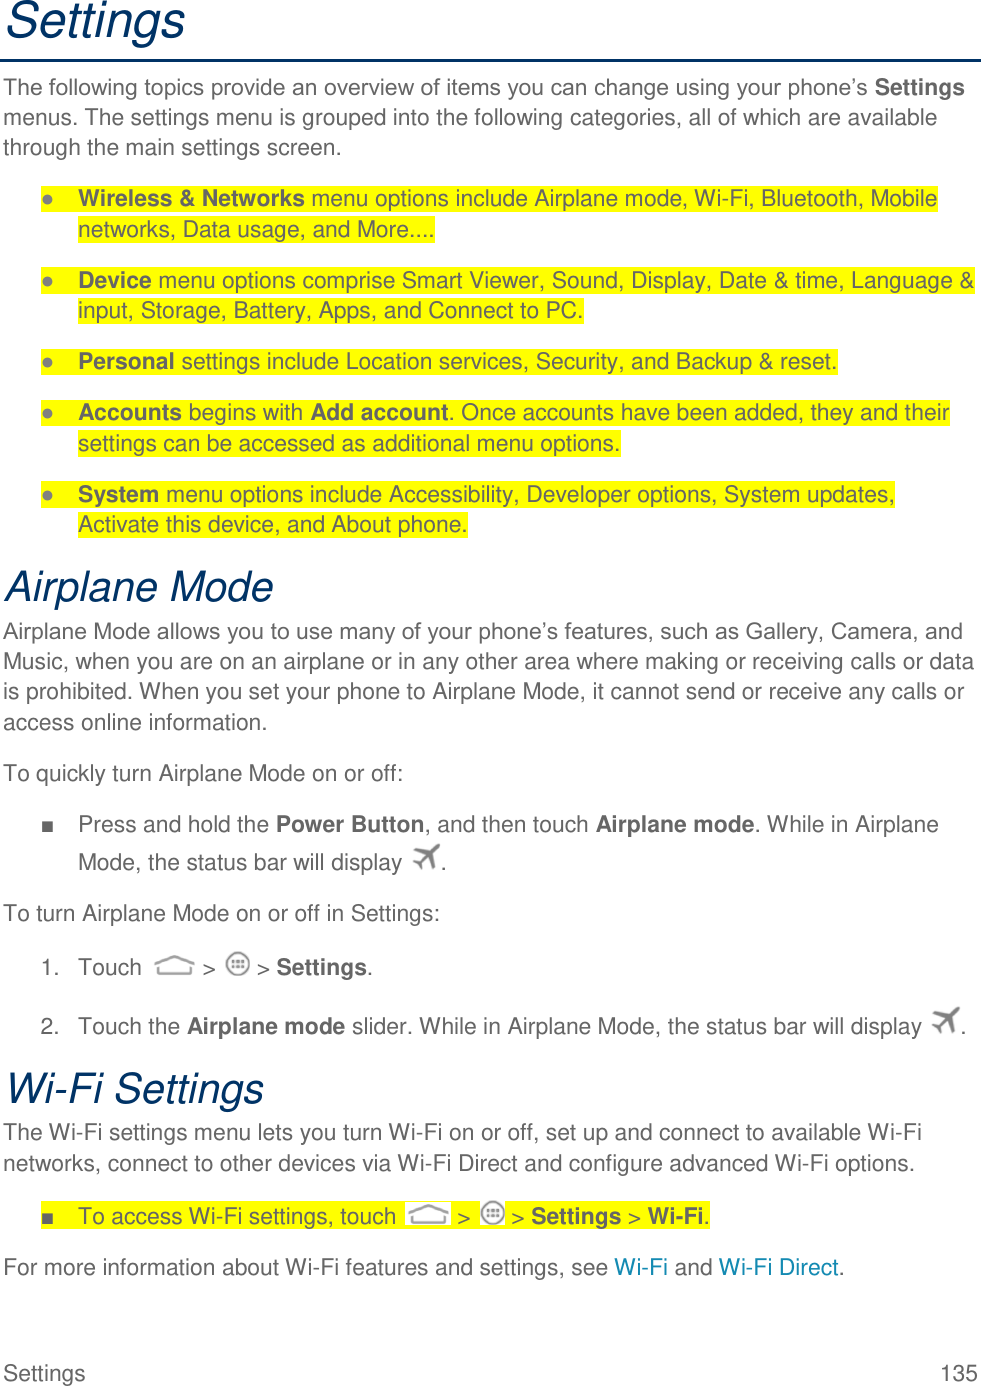 Settings  135 Settings The following topics provide an overview of items you can change using your phone’s Settings menus. The settings menu is grouped into the following categories, all of which are available through the main settings screen. ● Wireless &amp; Networks menu options include Airplane mode, Wi-Fi, Bluetooth, Mobile networks, Data usage, and More.... ● Device menu options comprise Smart Viewer, Sound, Display, Date &amp; time, Language &amp; input, Storage, Battery, Apps, and Connect to PC. ● Personal settings include Location services, Security, and Backup &amp; reset. ● Accounts begins with Add account. Once accounts have been added, they and their settings can be accessed as additional menu options. ● System menu options include Accessibility, Developer options, System updates, Activate this device, and About phone. Airplane Mode Airplane Mode allows you to use many of your phone’s features, such as Gallery, Camera, and Music, when you are on an airplane or in any other area where making or receiving calls or data is prohibited. When you set your phone to Airplane Mode, it cannot send or receive any calls or access online information. To quickly turn Airplane Mode on or off: ■  Press and hold the Power Button, and then touch Airplane mode. While in Airplane Mode, the status bar will display  . To turn Airplane Mode on or off in Settings: 1.  Touch   &gt;   &gt; Settings. 2.  Touch the Airplane mode slider. While in Airplane Mode, the status bar will display  . Wi-Fi Settings The Wi-Fi settings menu lets you turn Wi-Fi on or off, set up and connect to available Wi-Fi networks, connect to other devices via Wi-Fi Direct and configure advanced Wi-Fi options. ■  To access Wi-Fi settings, touch   &gt;   &gt; Settings &gt; Wi-Fi. For more information about Wi-Fi features and settings, see Wi-Fi and Wi-Fi Direct. 